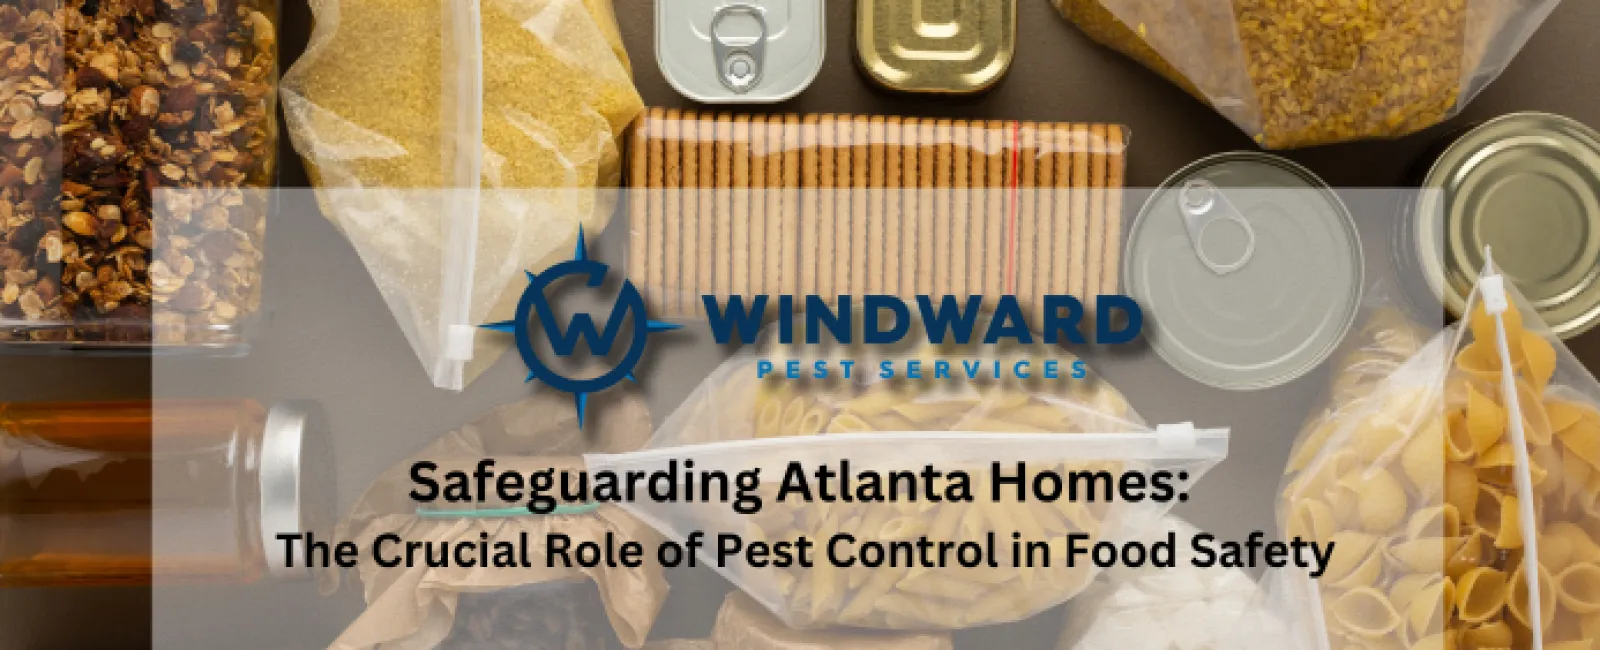 Safeguarding Atlanta Homes: The Crucial Role of Pest Control in Food Safety